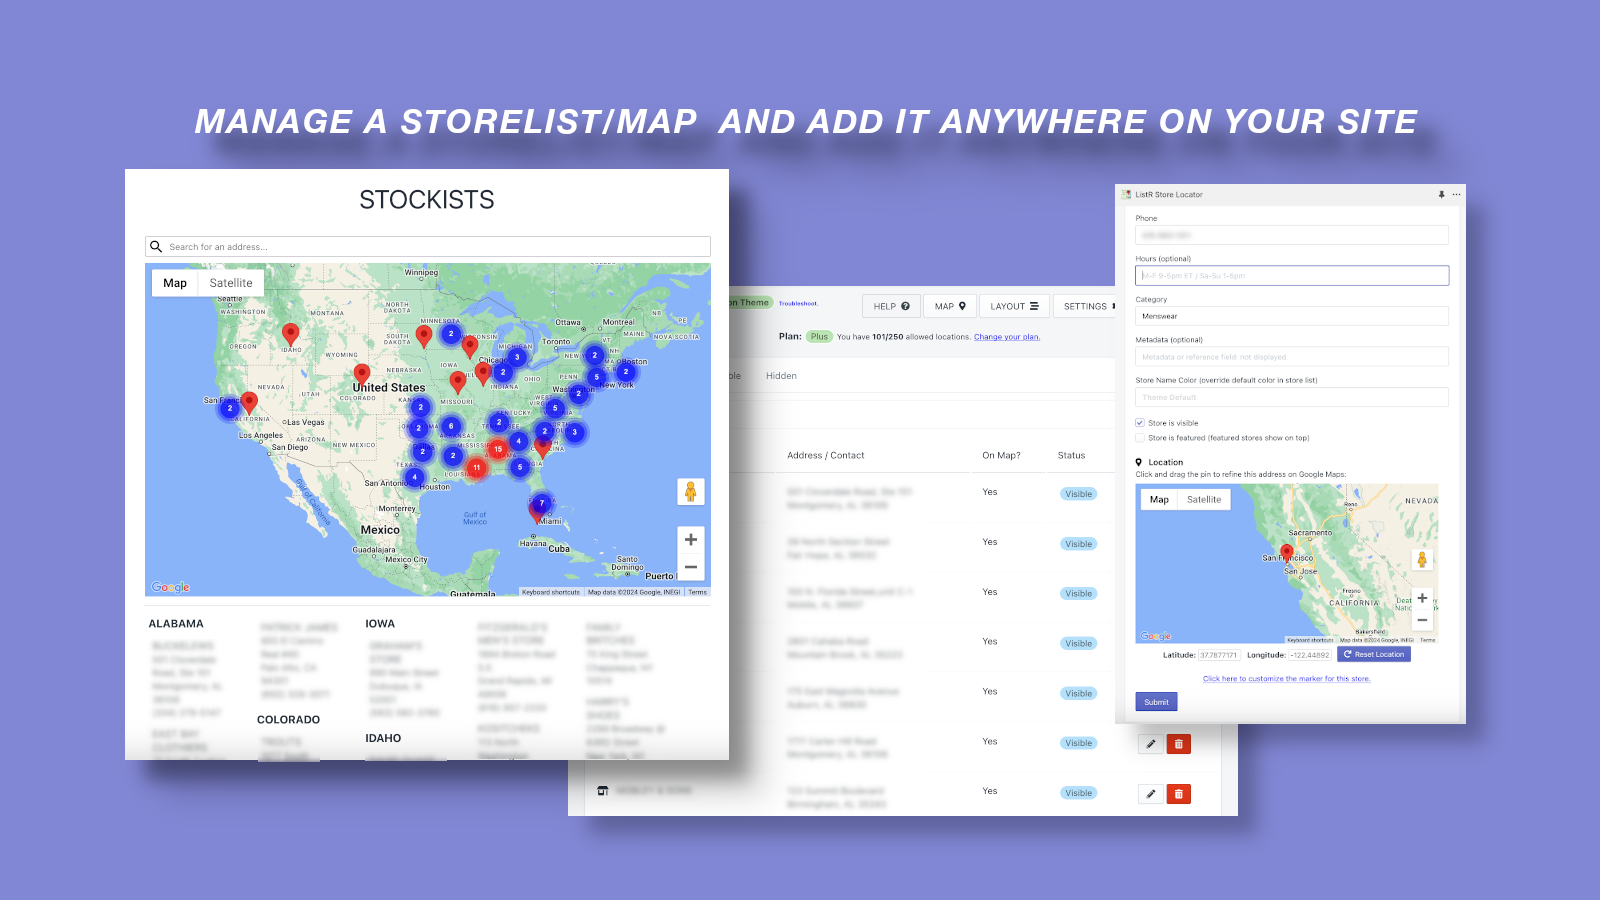 Manage a storelist/map and show anywhere on your site